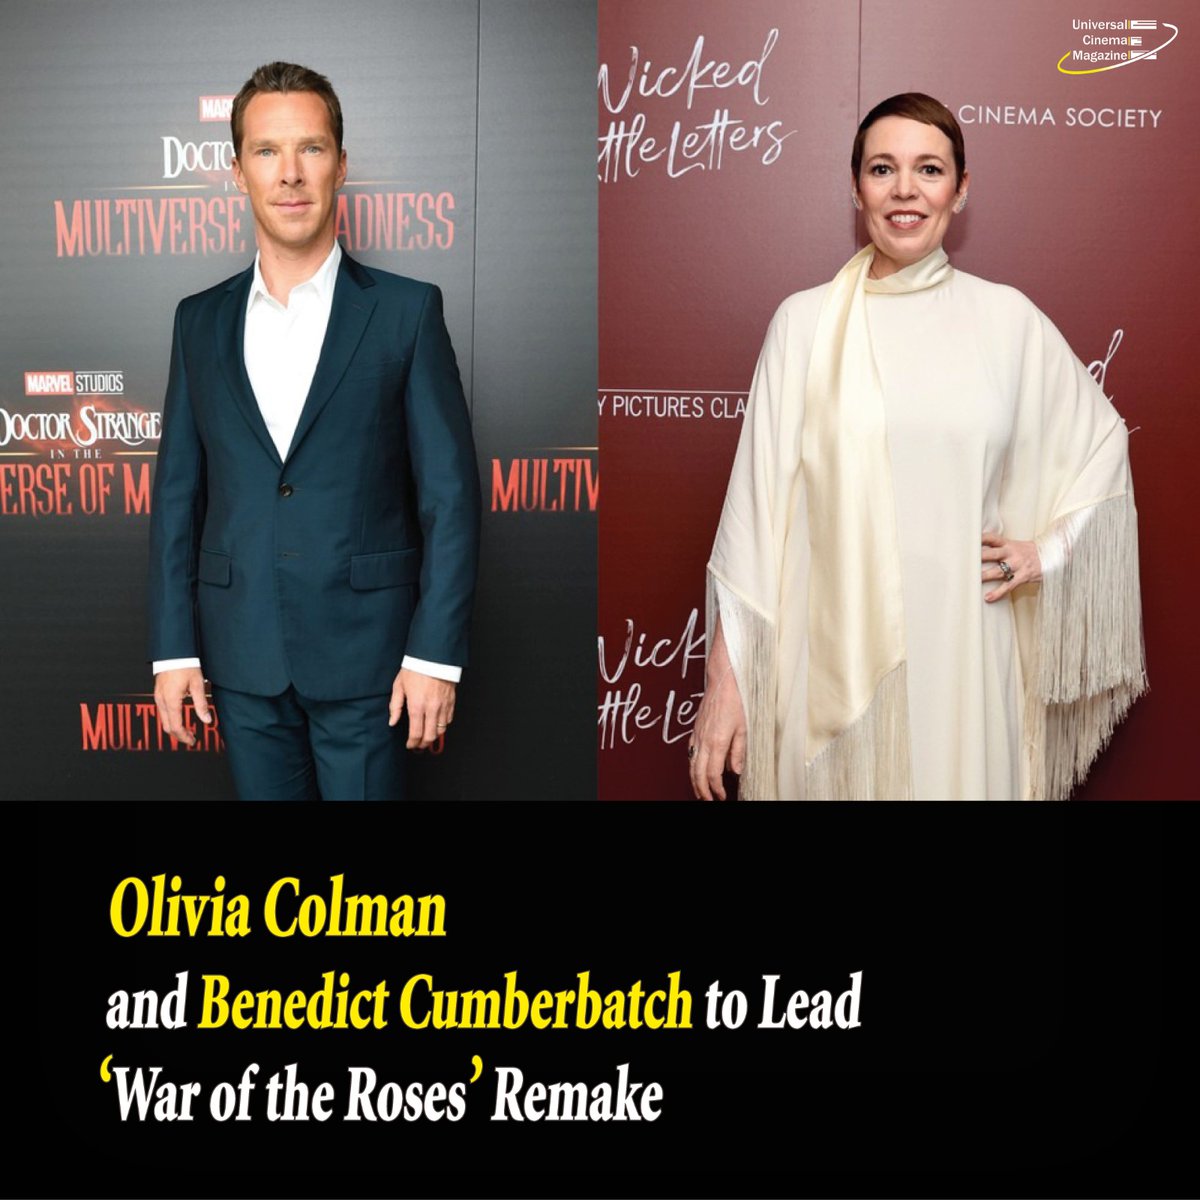 Olivia Colman and Benedict Cumberbatch are ready to duke it out in satirical divorce comedy “The Roses.” 

Read more in bio.
Source:indiewire

#oliviacolman #benedictcumberbatch #waroftheroses #theroses #romancingthestone #poorthings